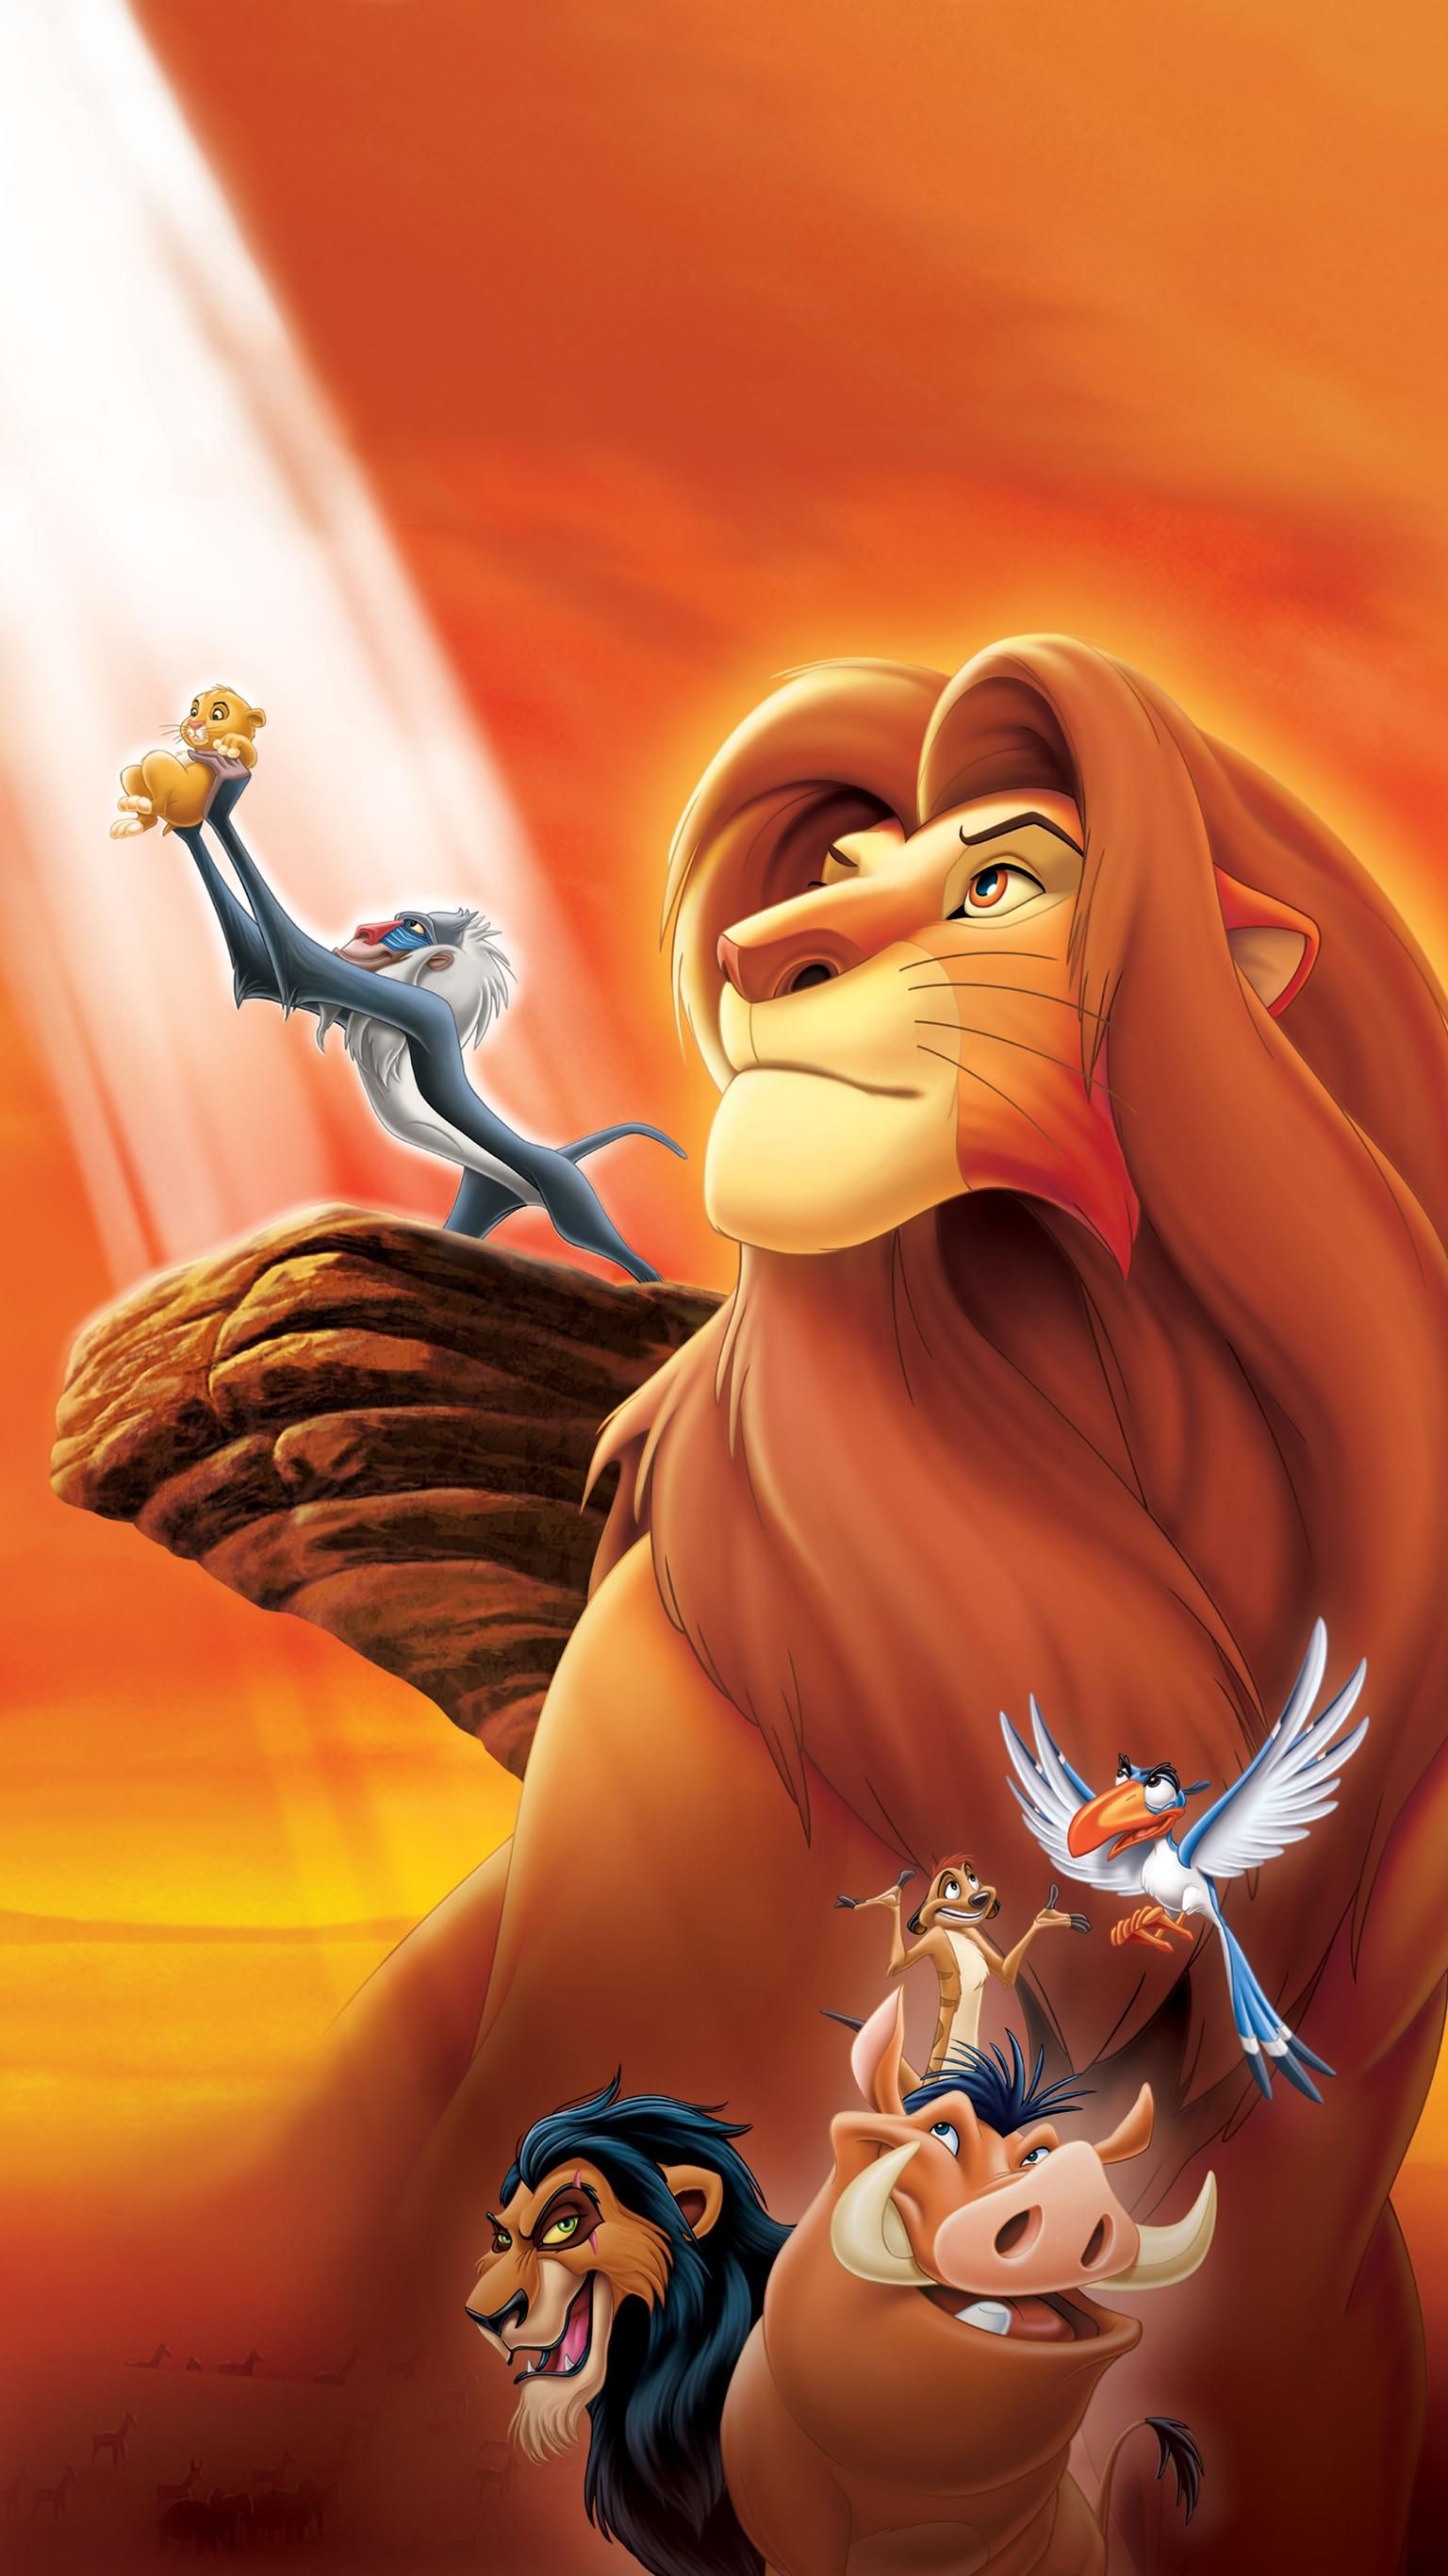 The Lion King (1994) Wallpapers